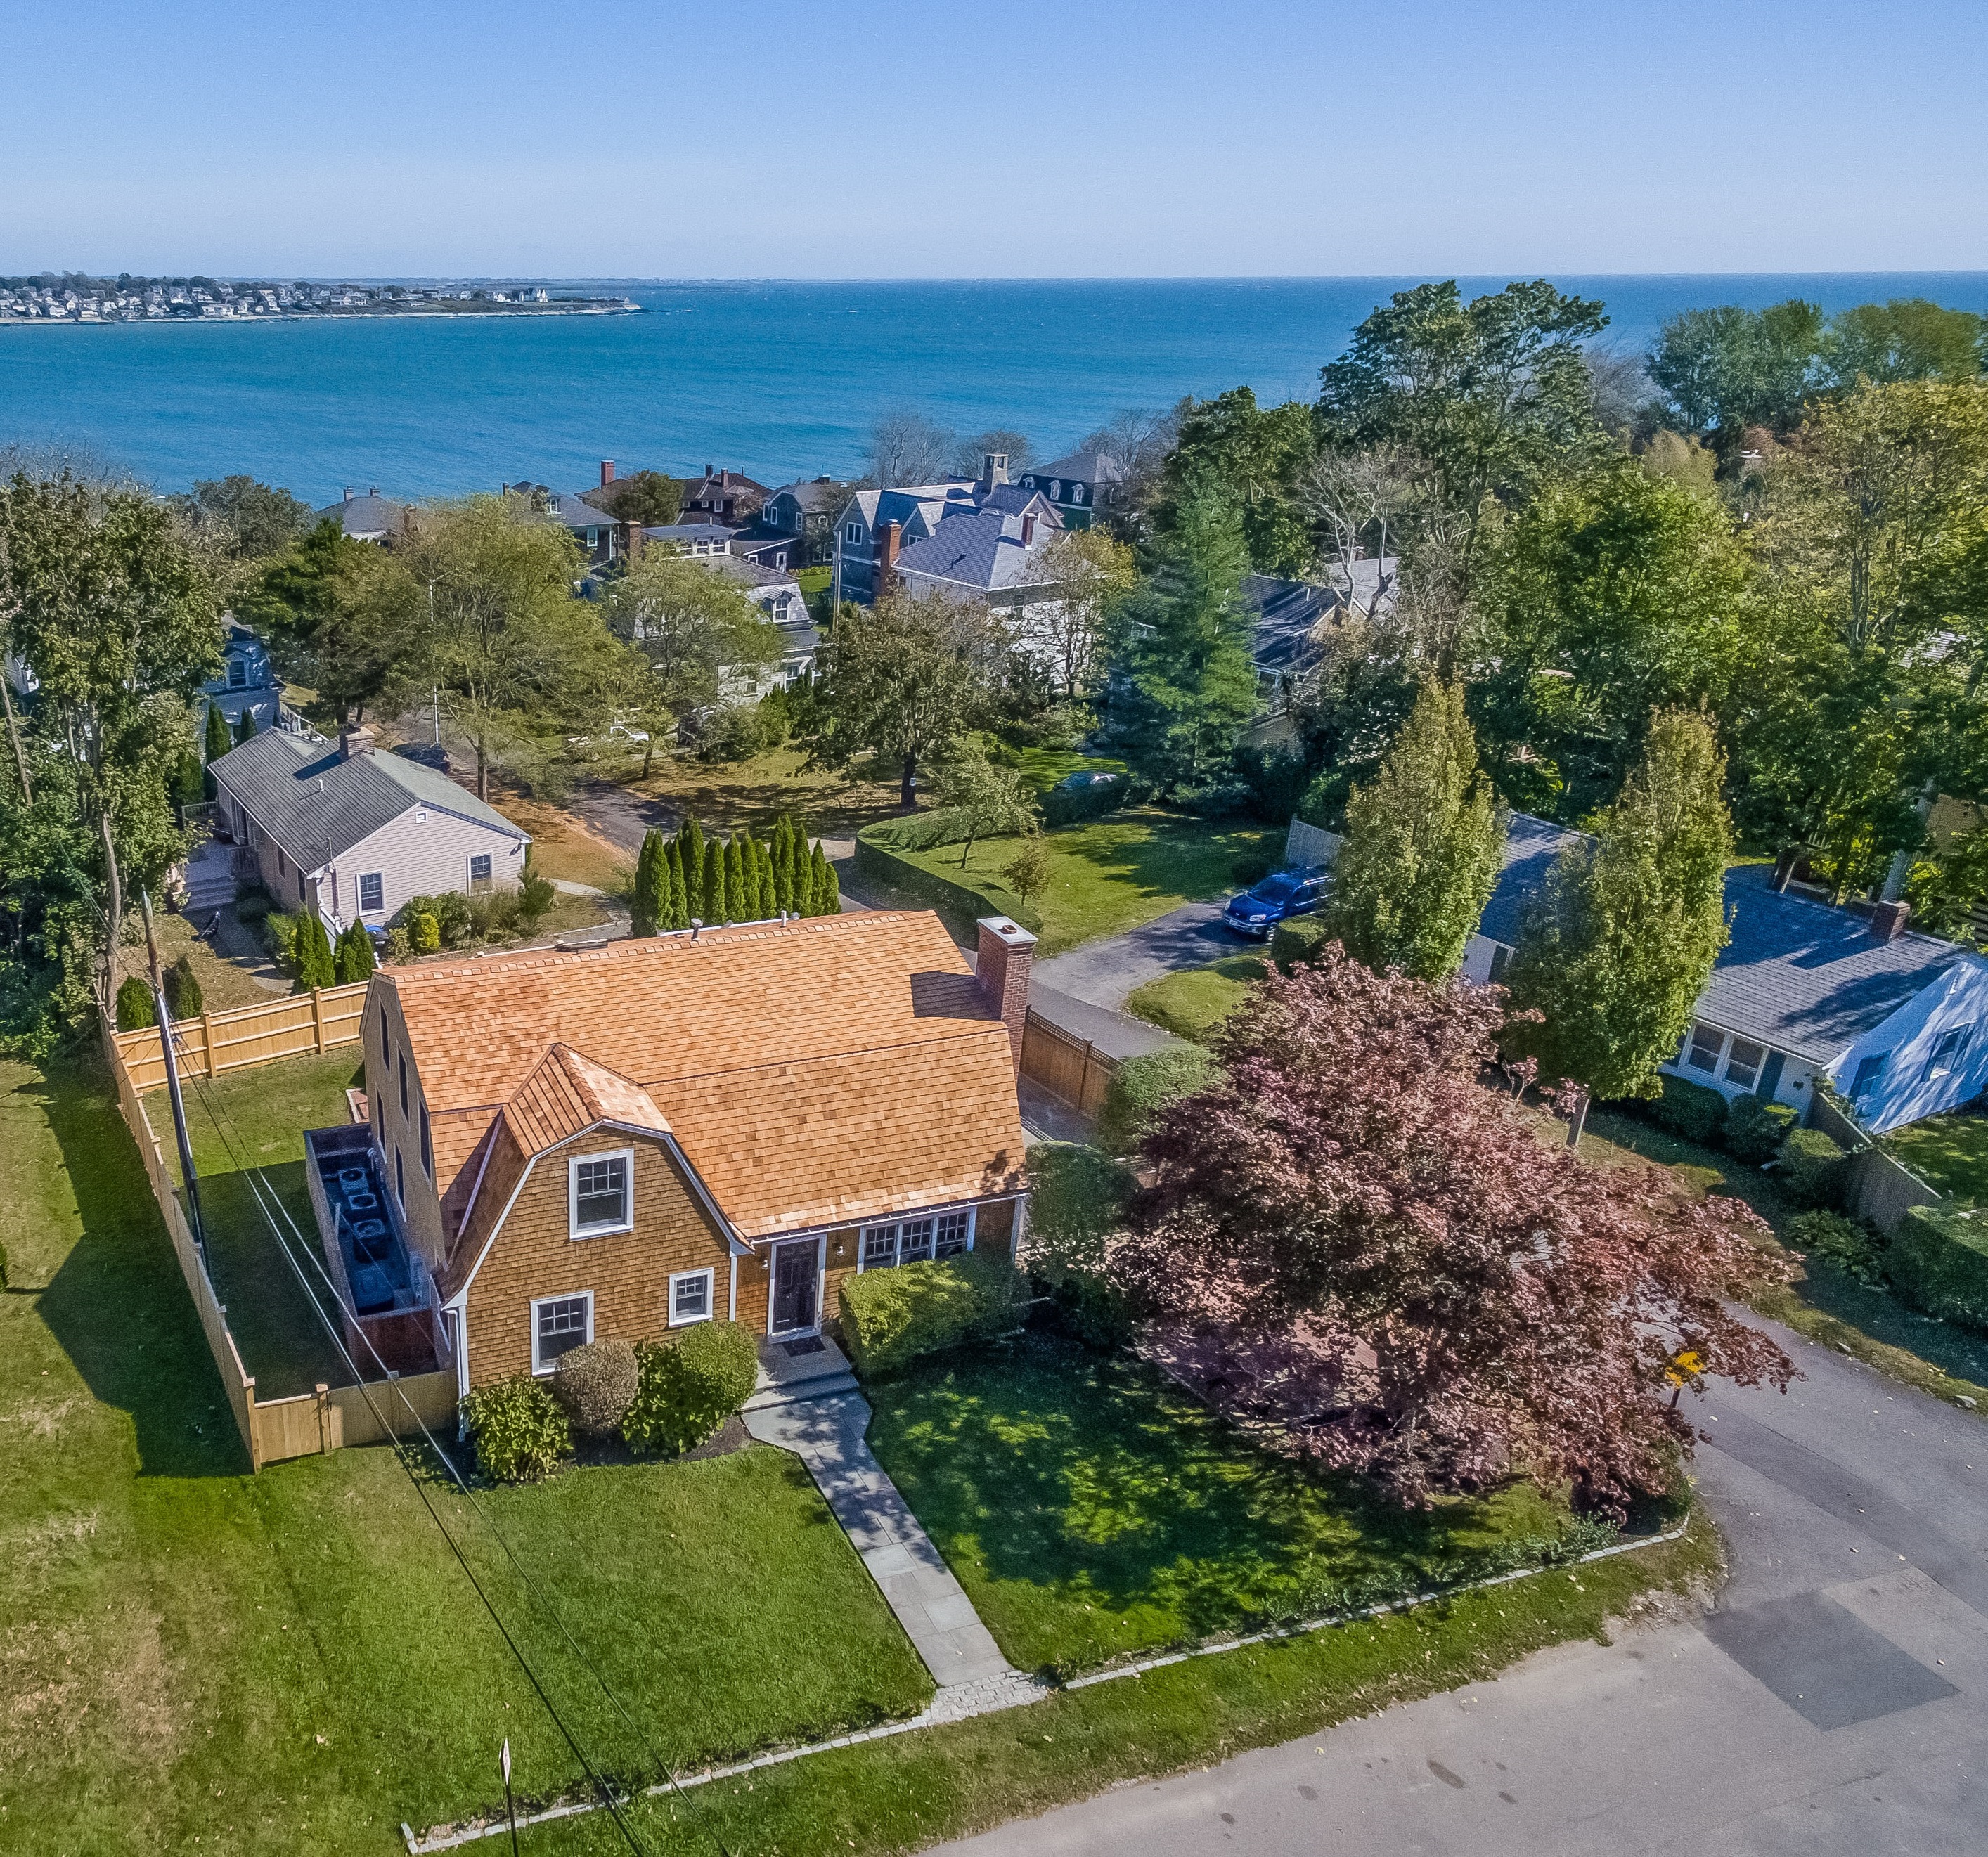 SEACLIFF COTTAGE IN NEWPORT’S CLIFF WALK NEIGHBORHOOD SELLS FOR $1.24M